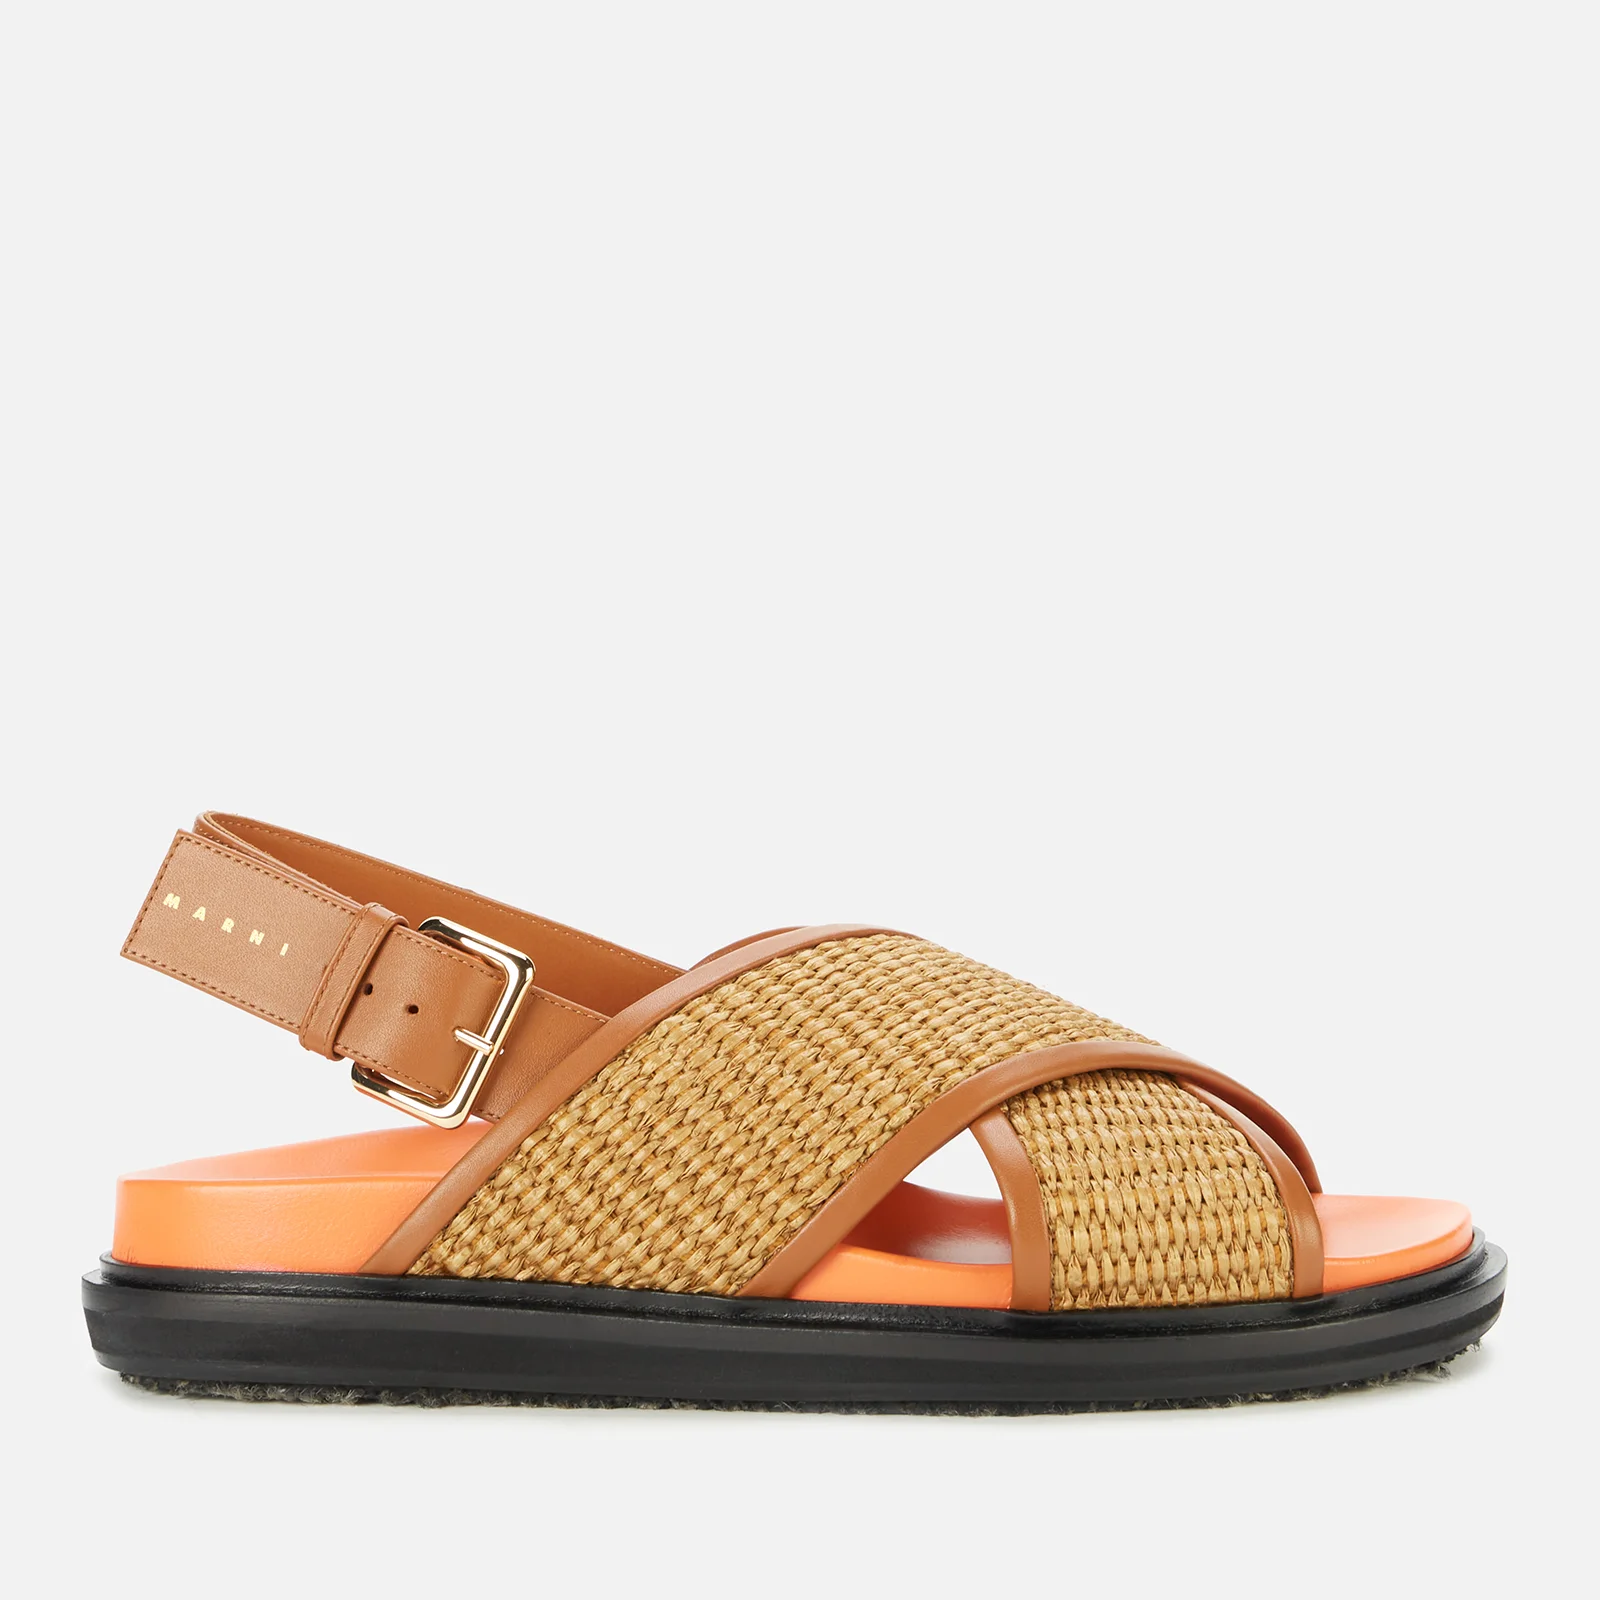 Marni Women's Woven Footbed Sandals - Raw Siena/Dust Apricot Image 1